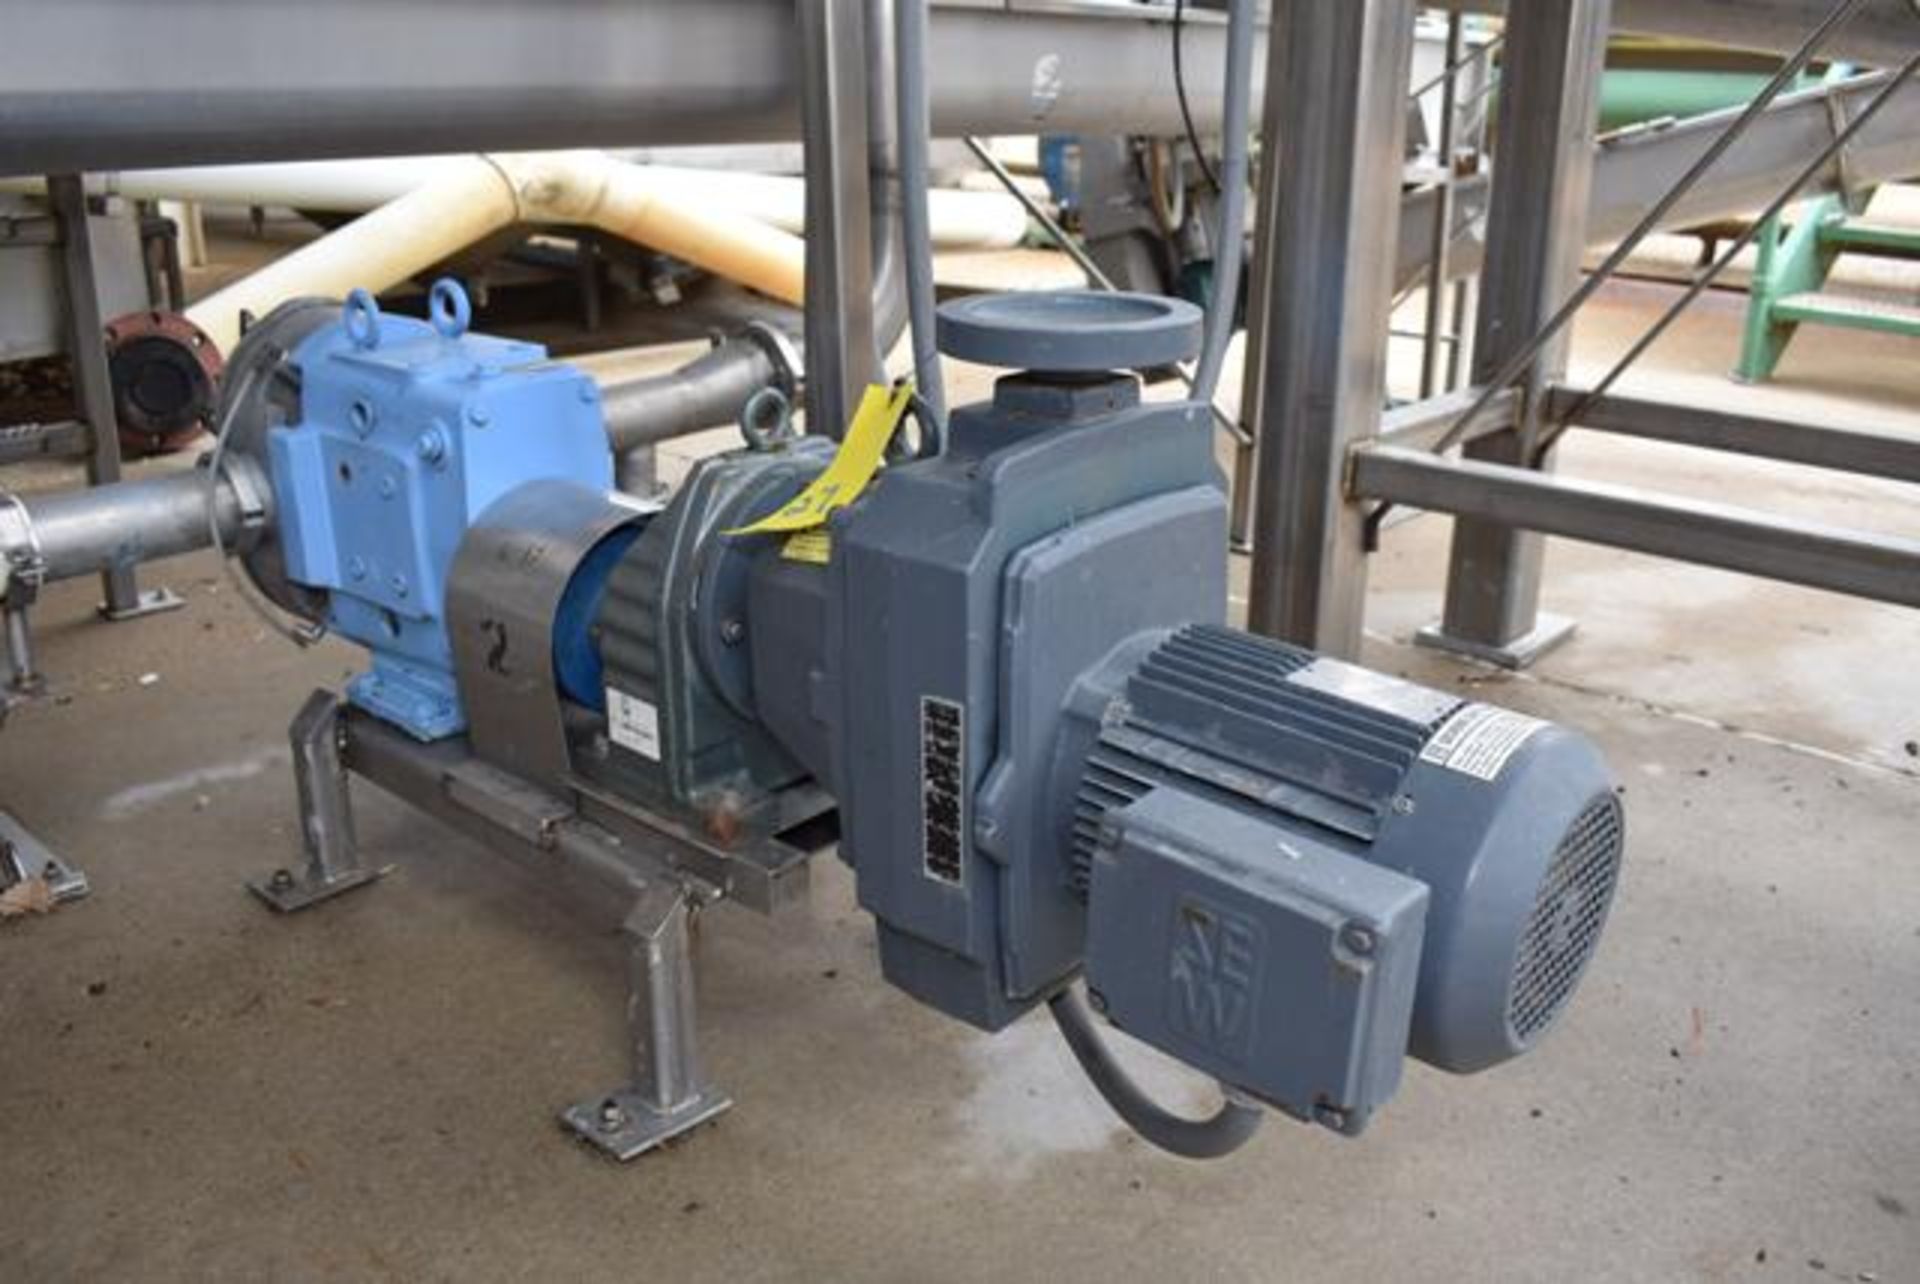 Waukesha Model 130 Pump, S/N 1605002, Equipped with SEW Drive, Loading Fee: $125 - Image 3 of 3